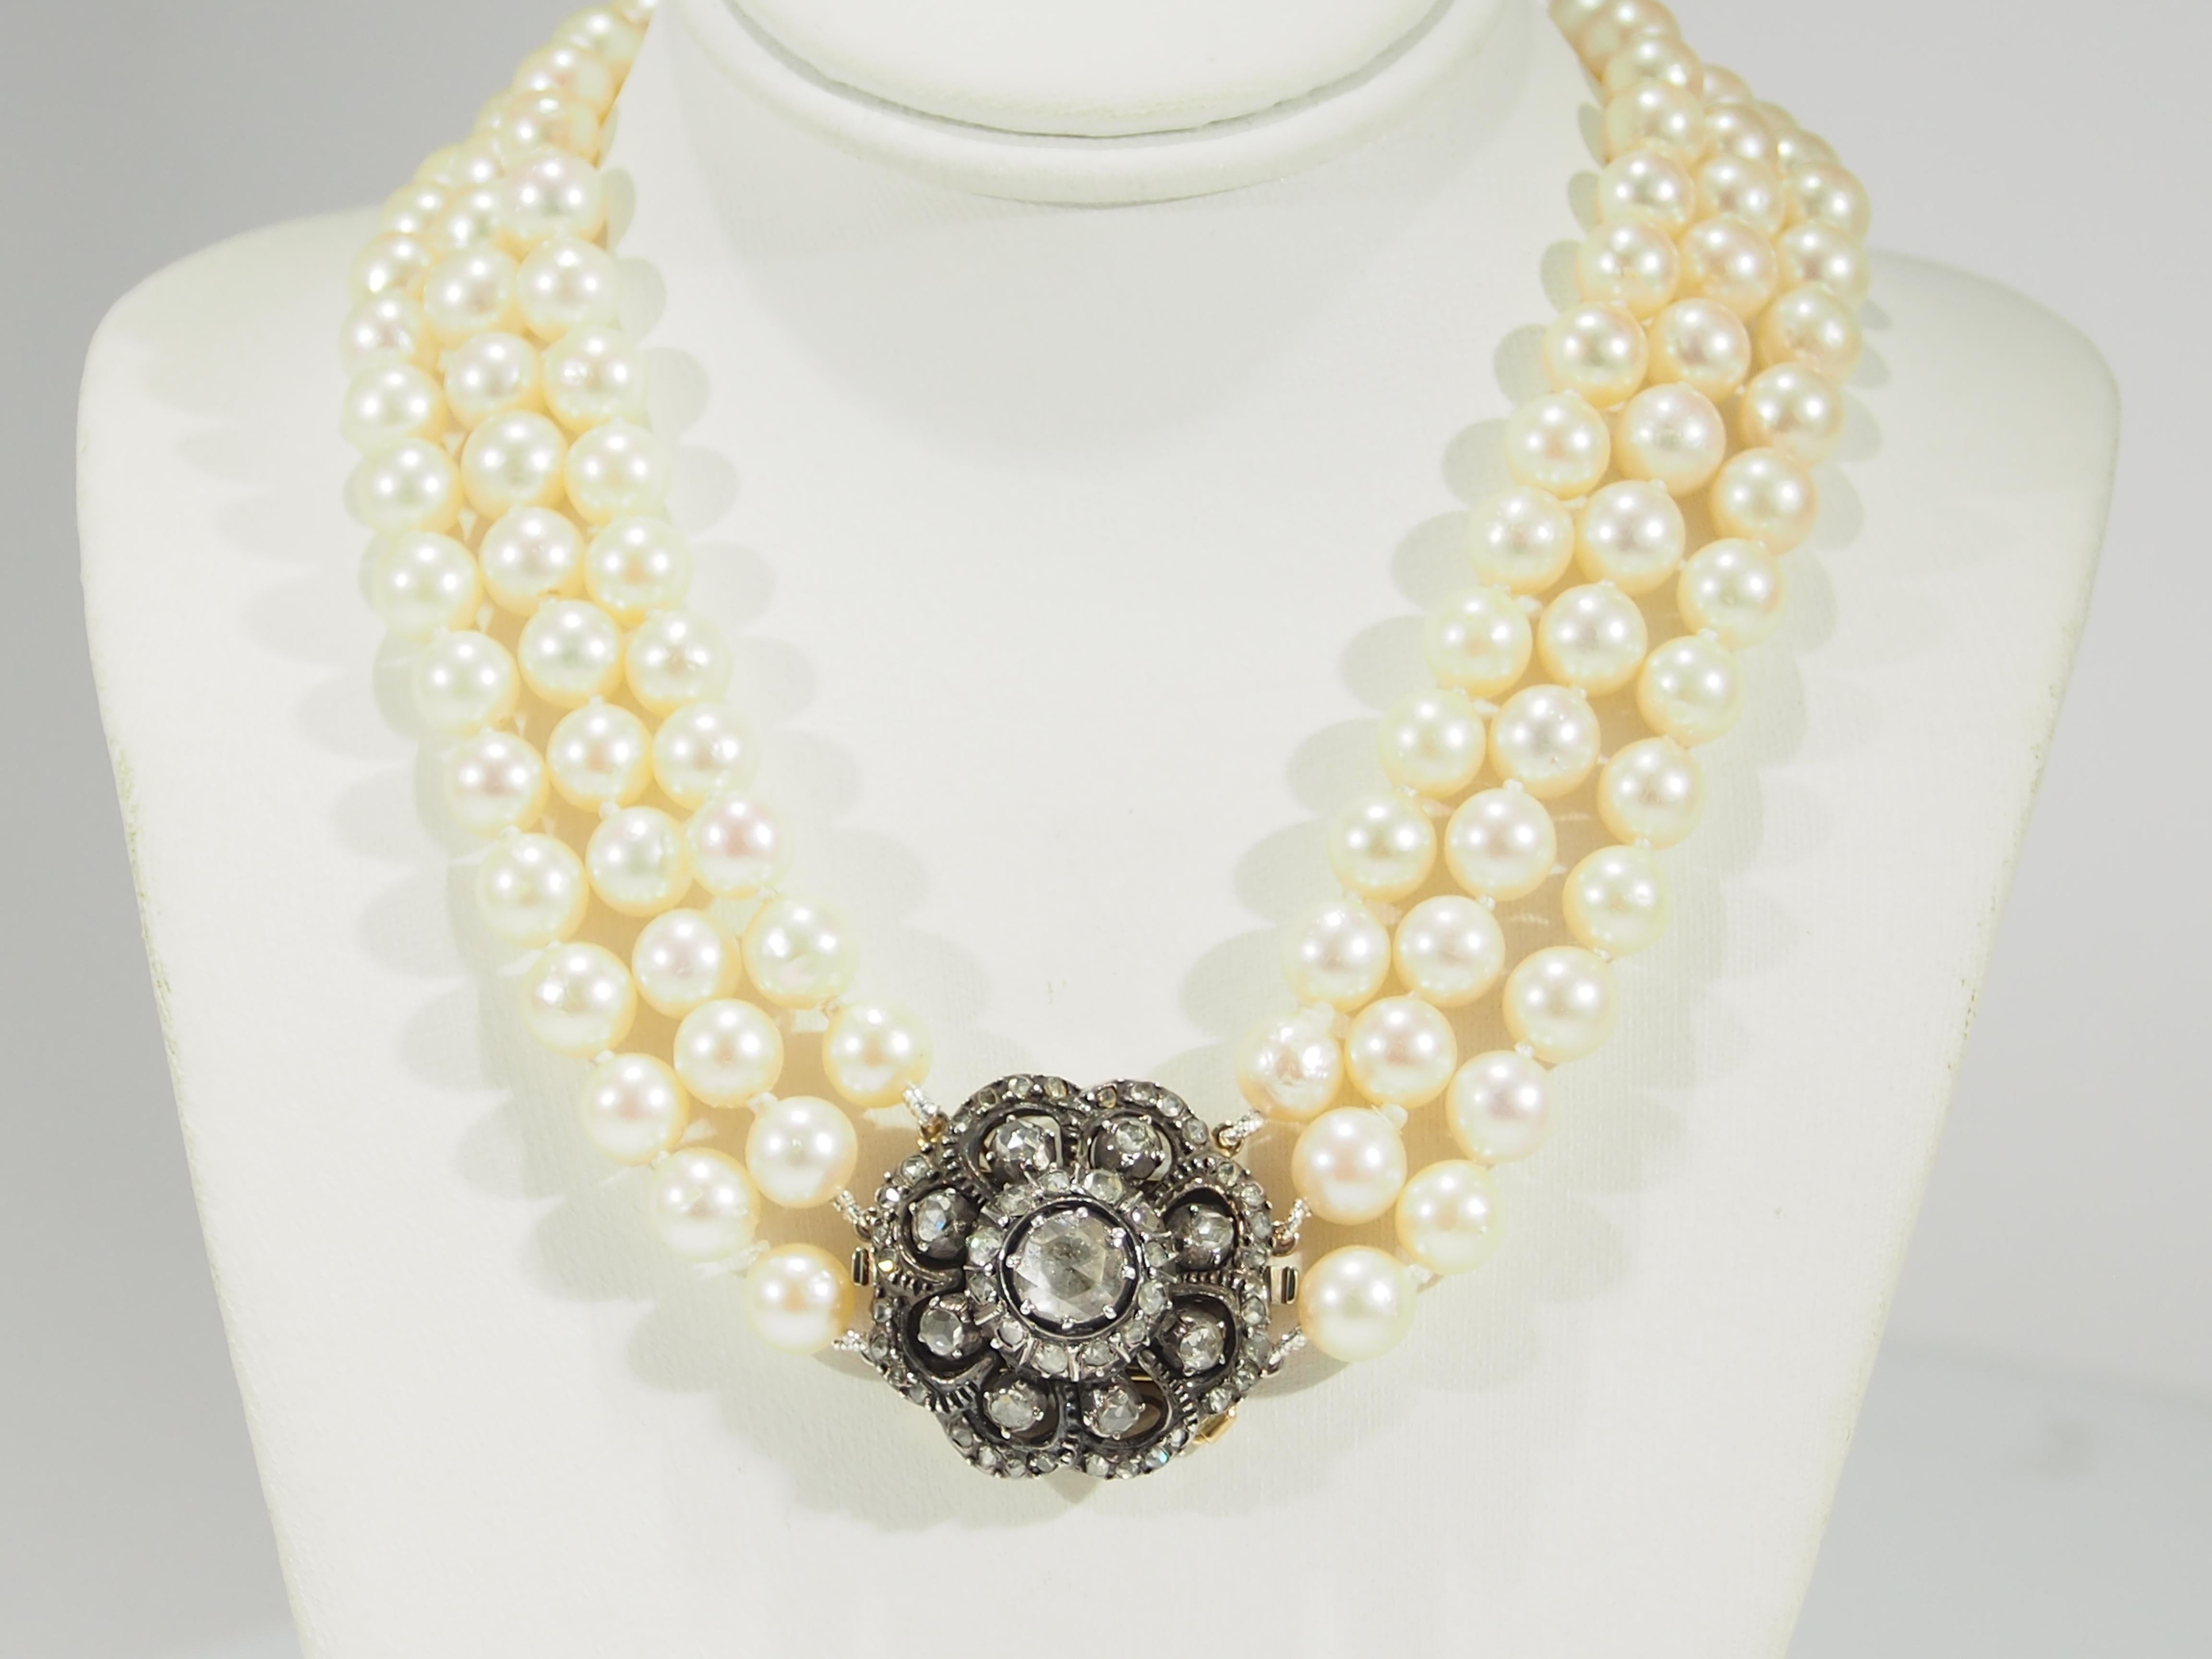 This is an heirloom quality Pearl Necklace fashioned with a 14K Yellow Gold Diamond Clasp. This exquisite Edwardian Necklace is designed in a triple row of lustrous 6.5mm Pearls with a 1 inch in diameter 14K Yellow Gold Clasp enhanced with a swirl